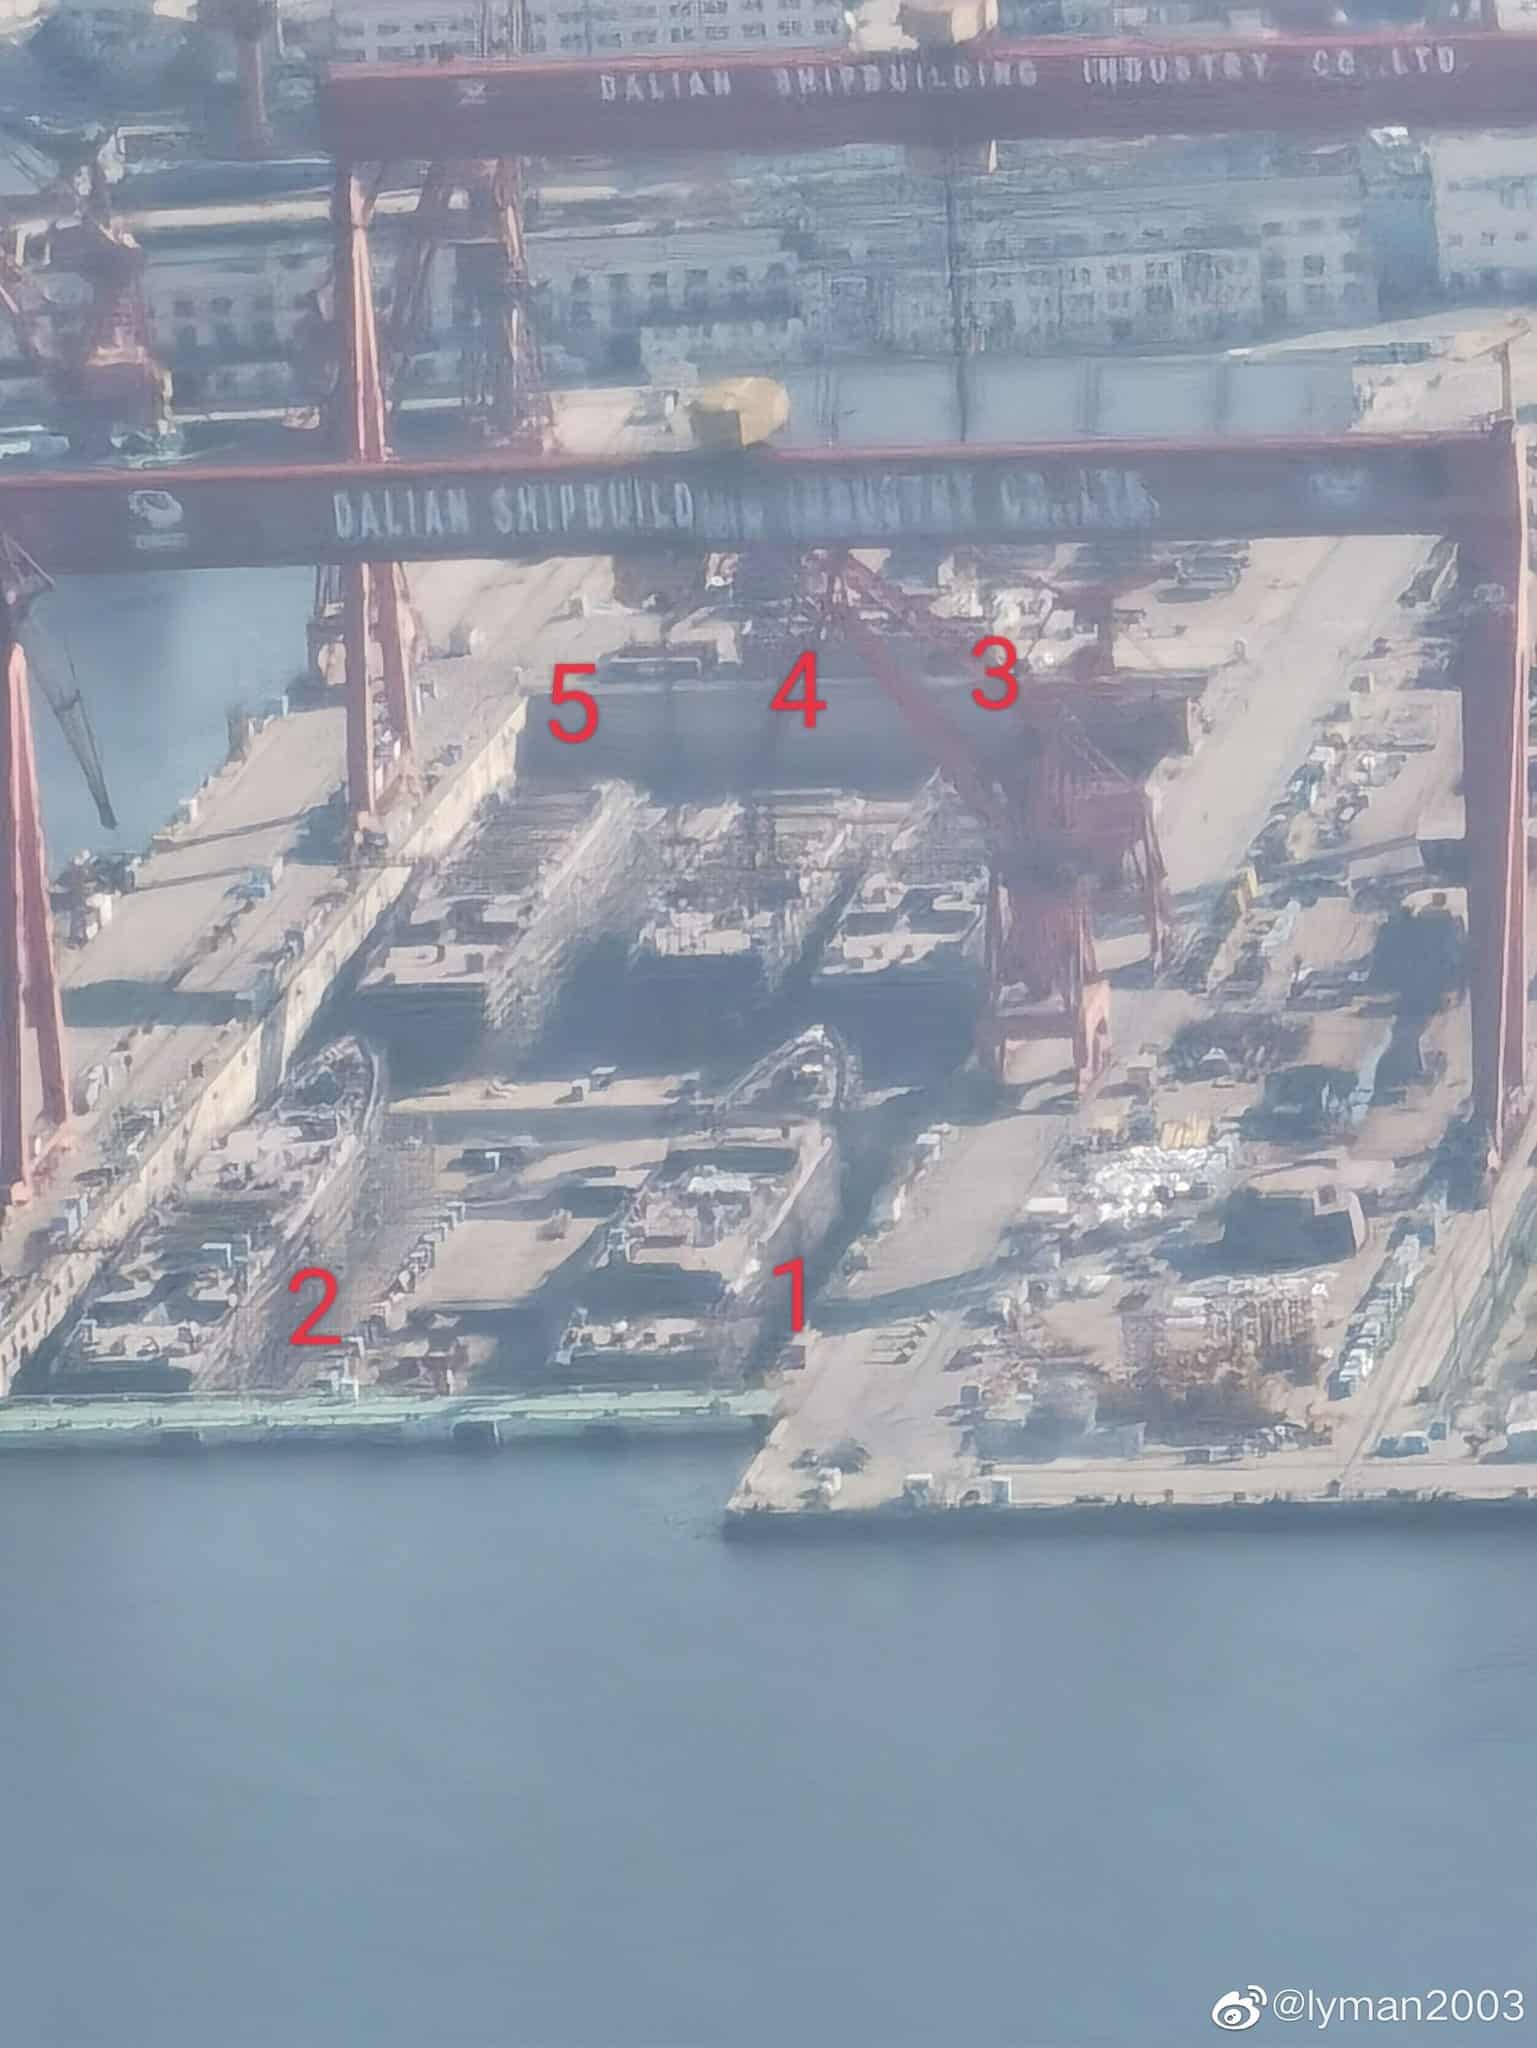 Five-Type-052D-Destroyers-Under-Construction-in-China.jpg